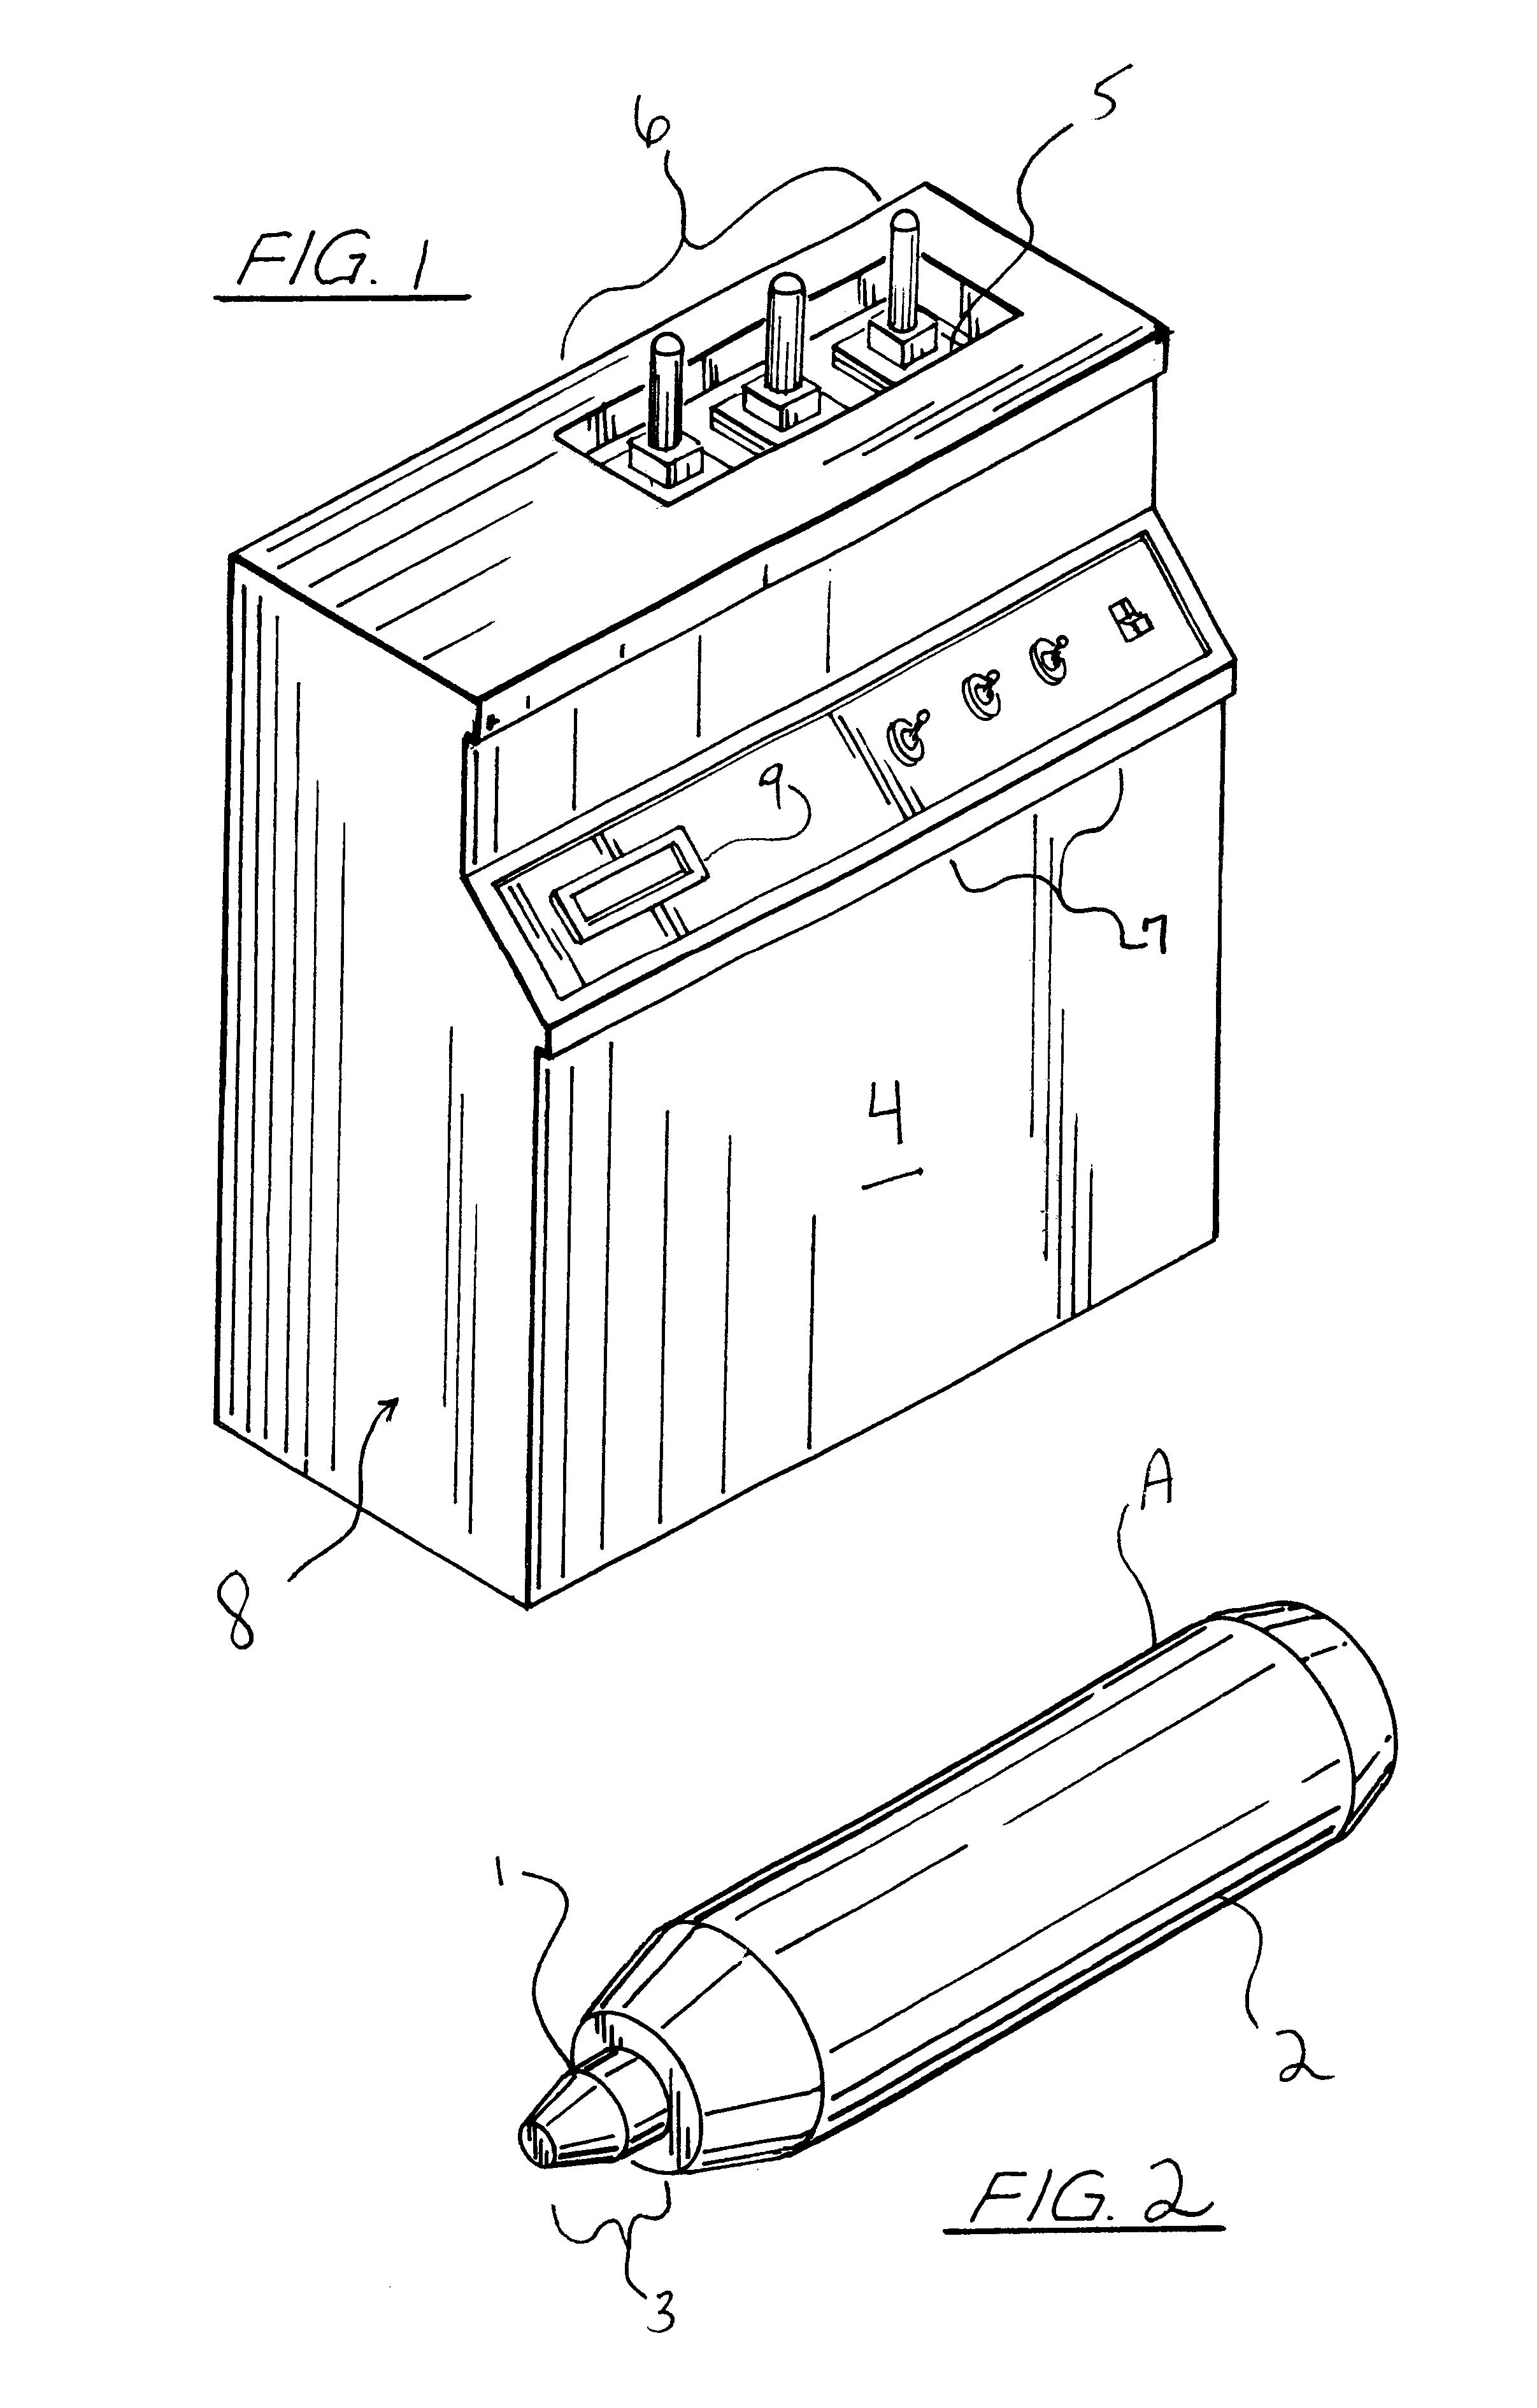 Hand-held, heat sink cryoprobe, system for heat extraction thereof, and method therefore